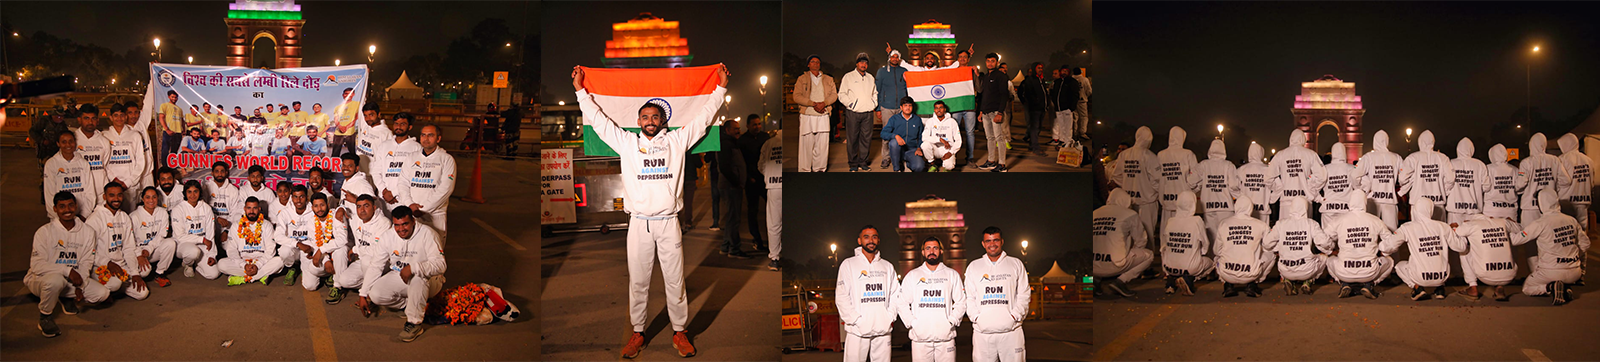 Himalayan Knights Completes World’s Longest Non-stop Relay Run